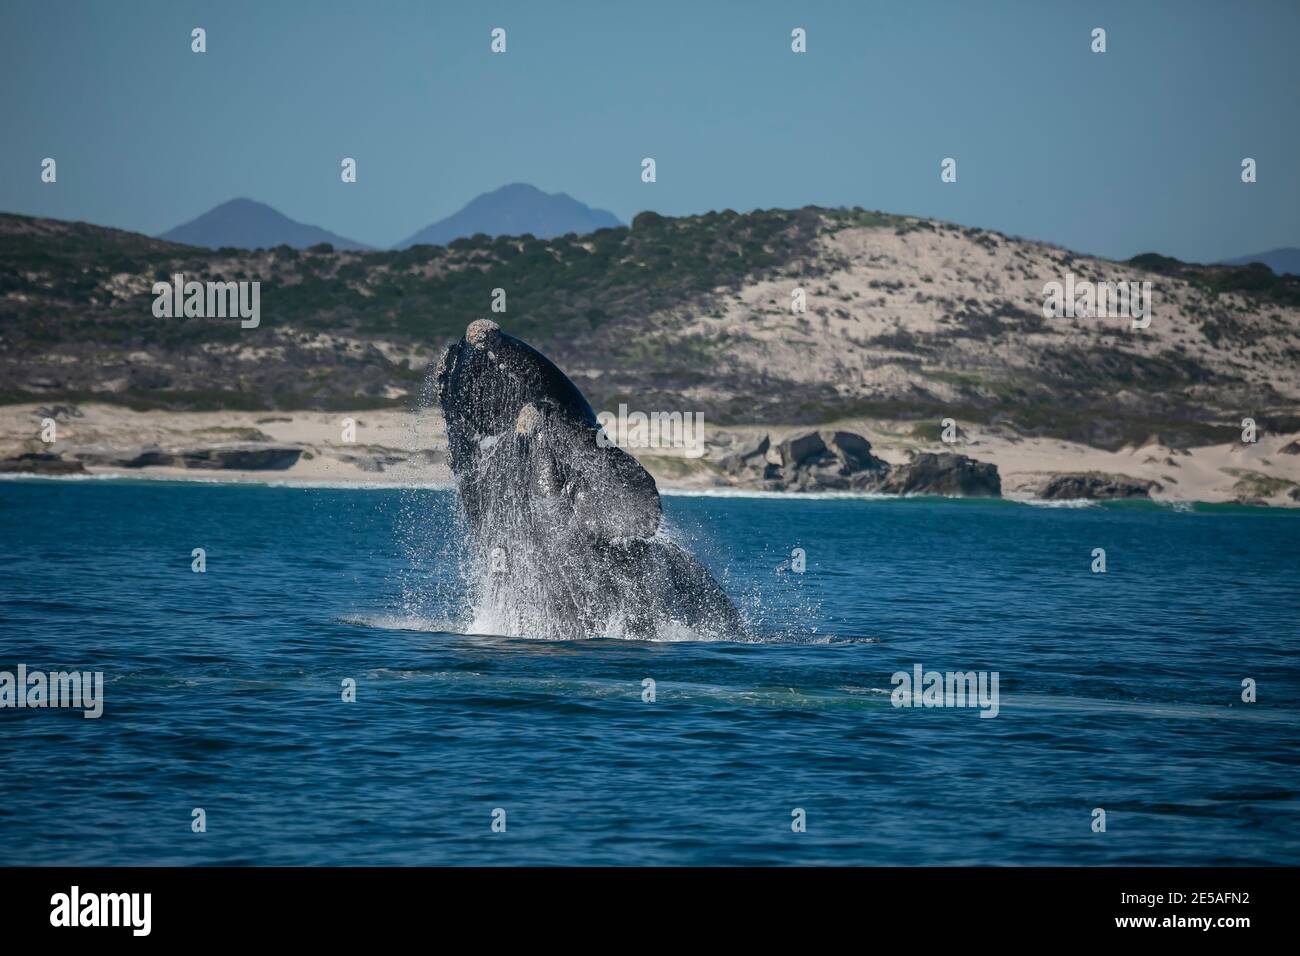 Whale in Gansbaai of South Africa. Stock Photo